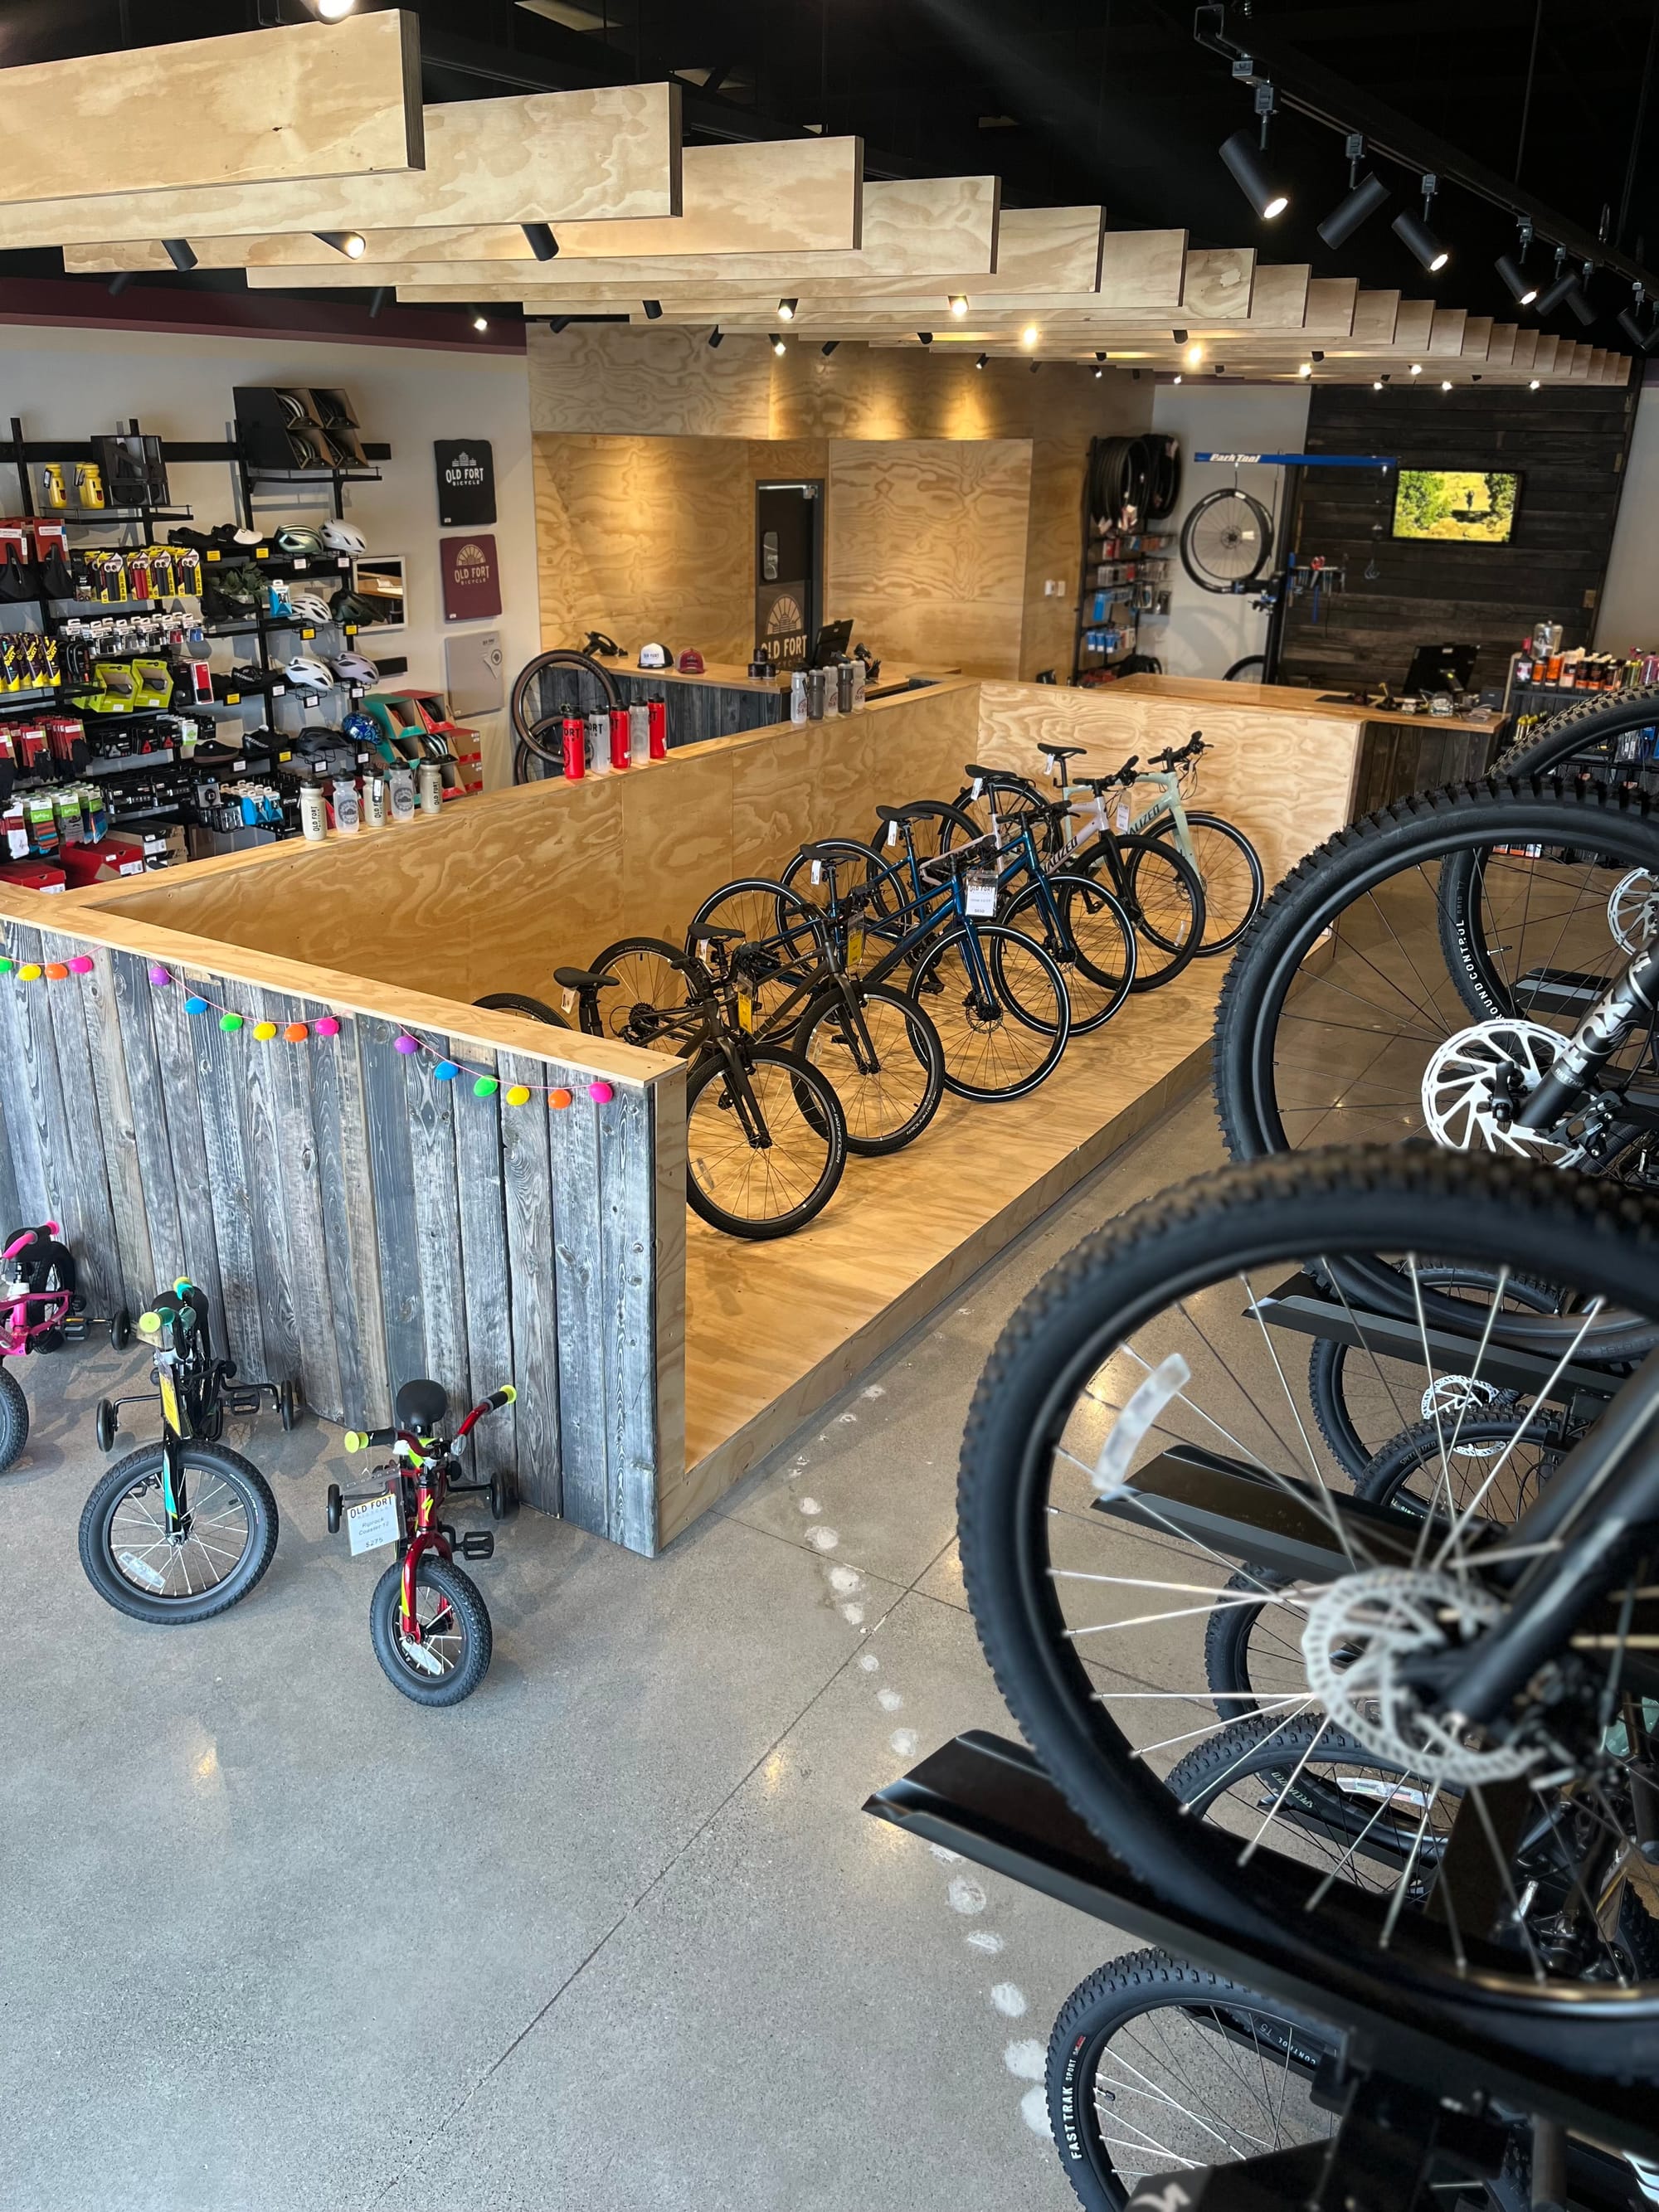 Meet Old Fort Bicycles: a new shop on the North side shares ways to improve cycling for all